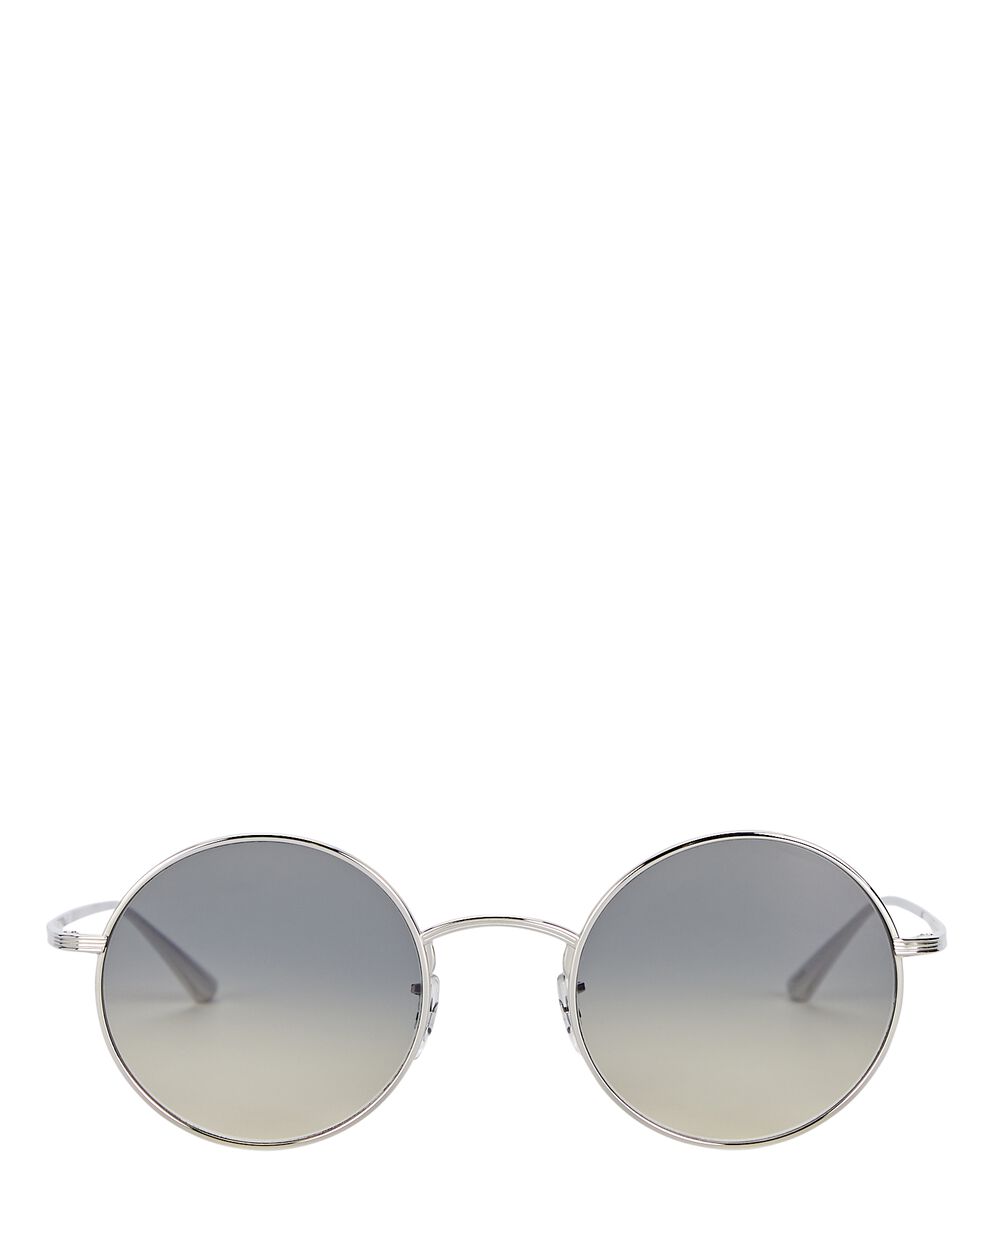 The Row x Oliver Peoples After Midnight Round Sunglasses | INTERMIX®